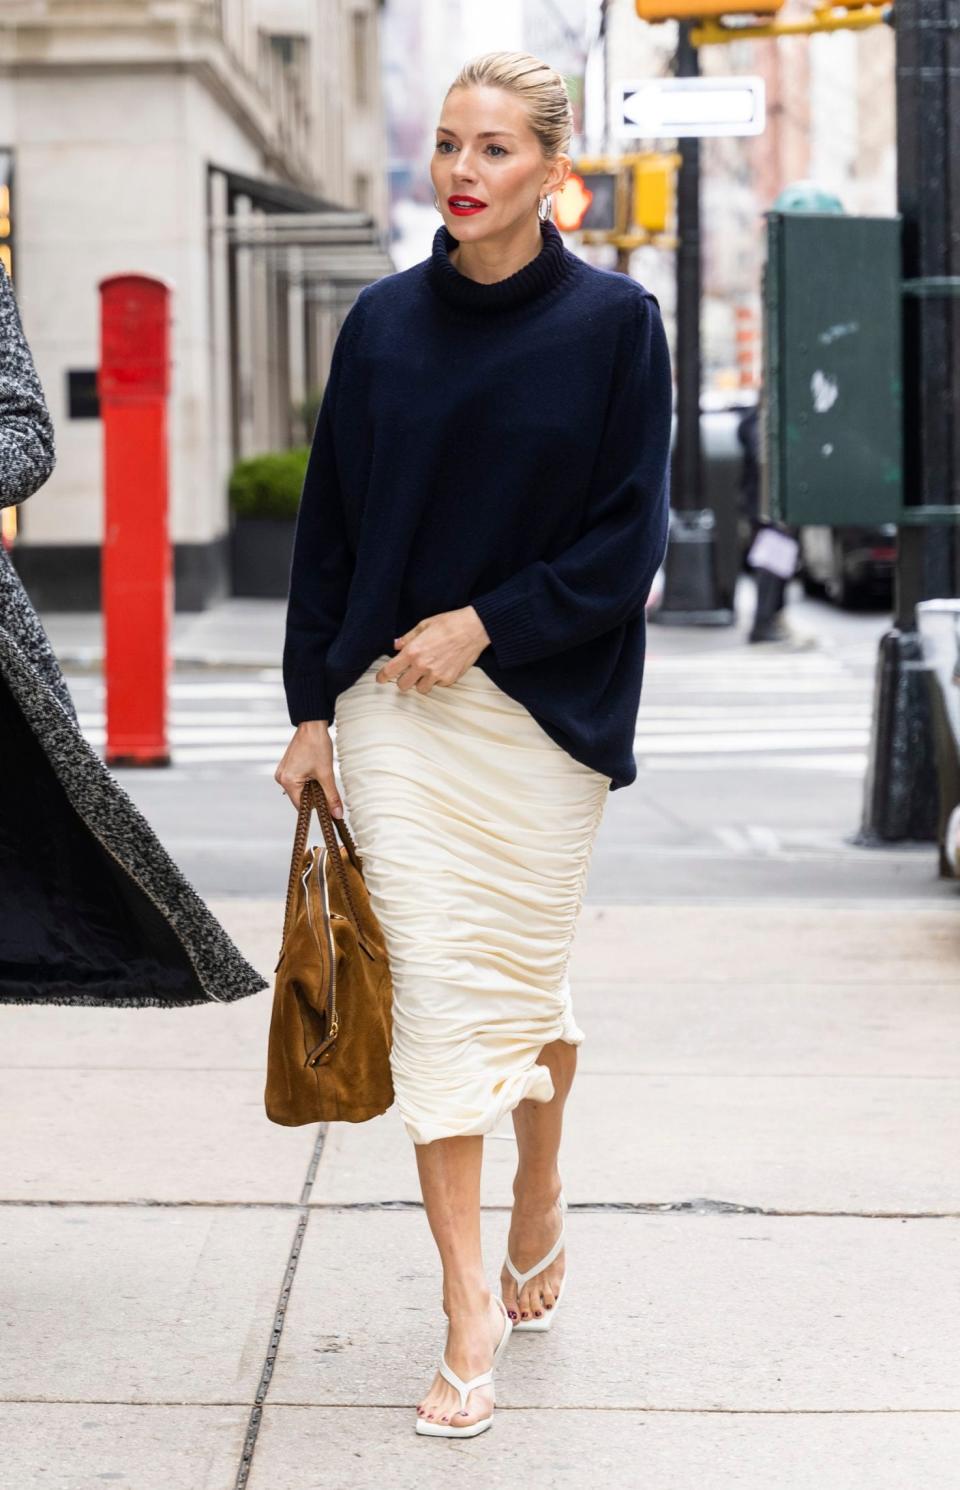 Sienna Miller was spotted wearing heeled slippers in New York City